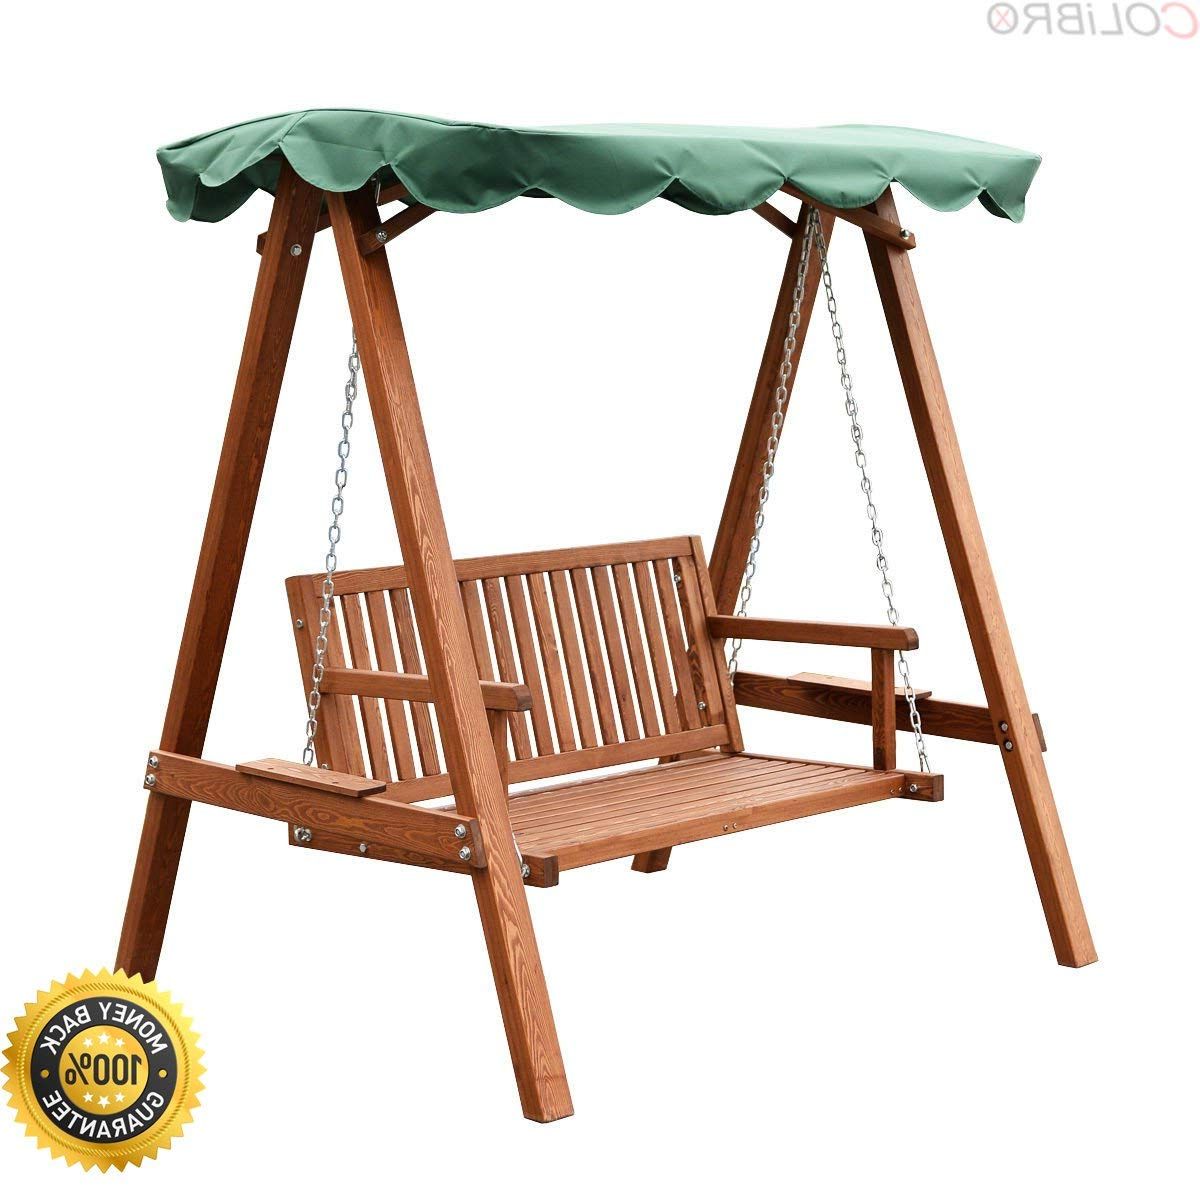 2019 2 Person Light Teak Oil Wood Outdoor Swings Intended For Cheap Wooden Garden Swing Seats Outdoor Furniture, Find (View 7 of 30)